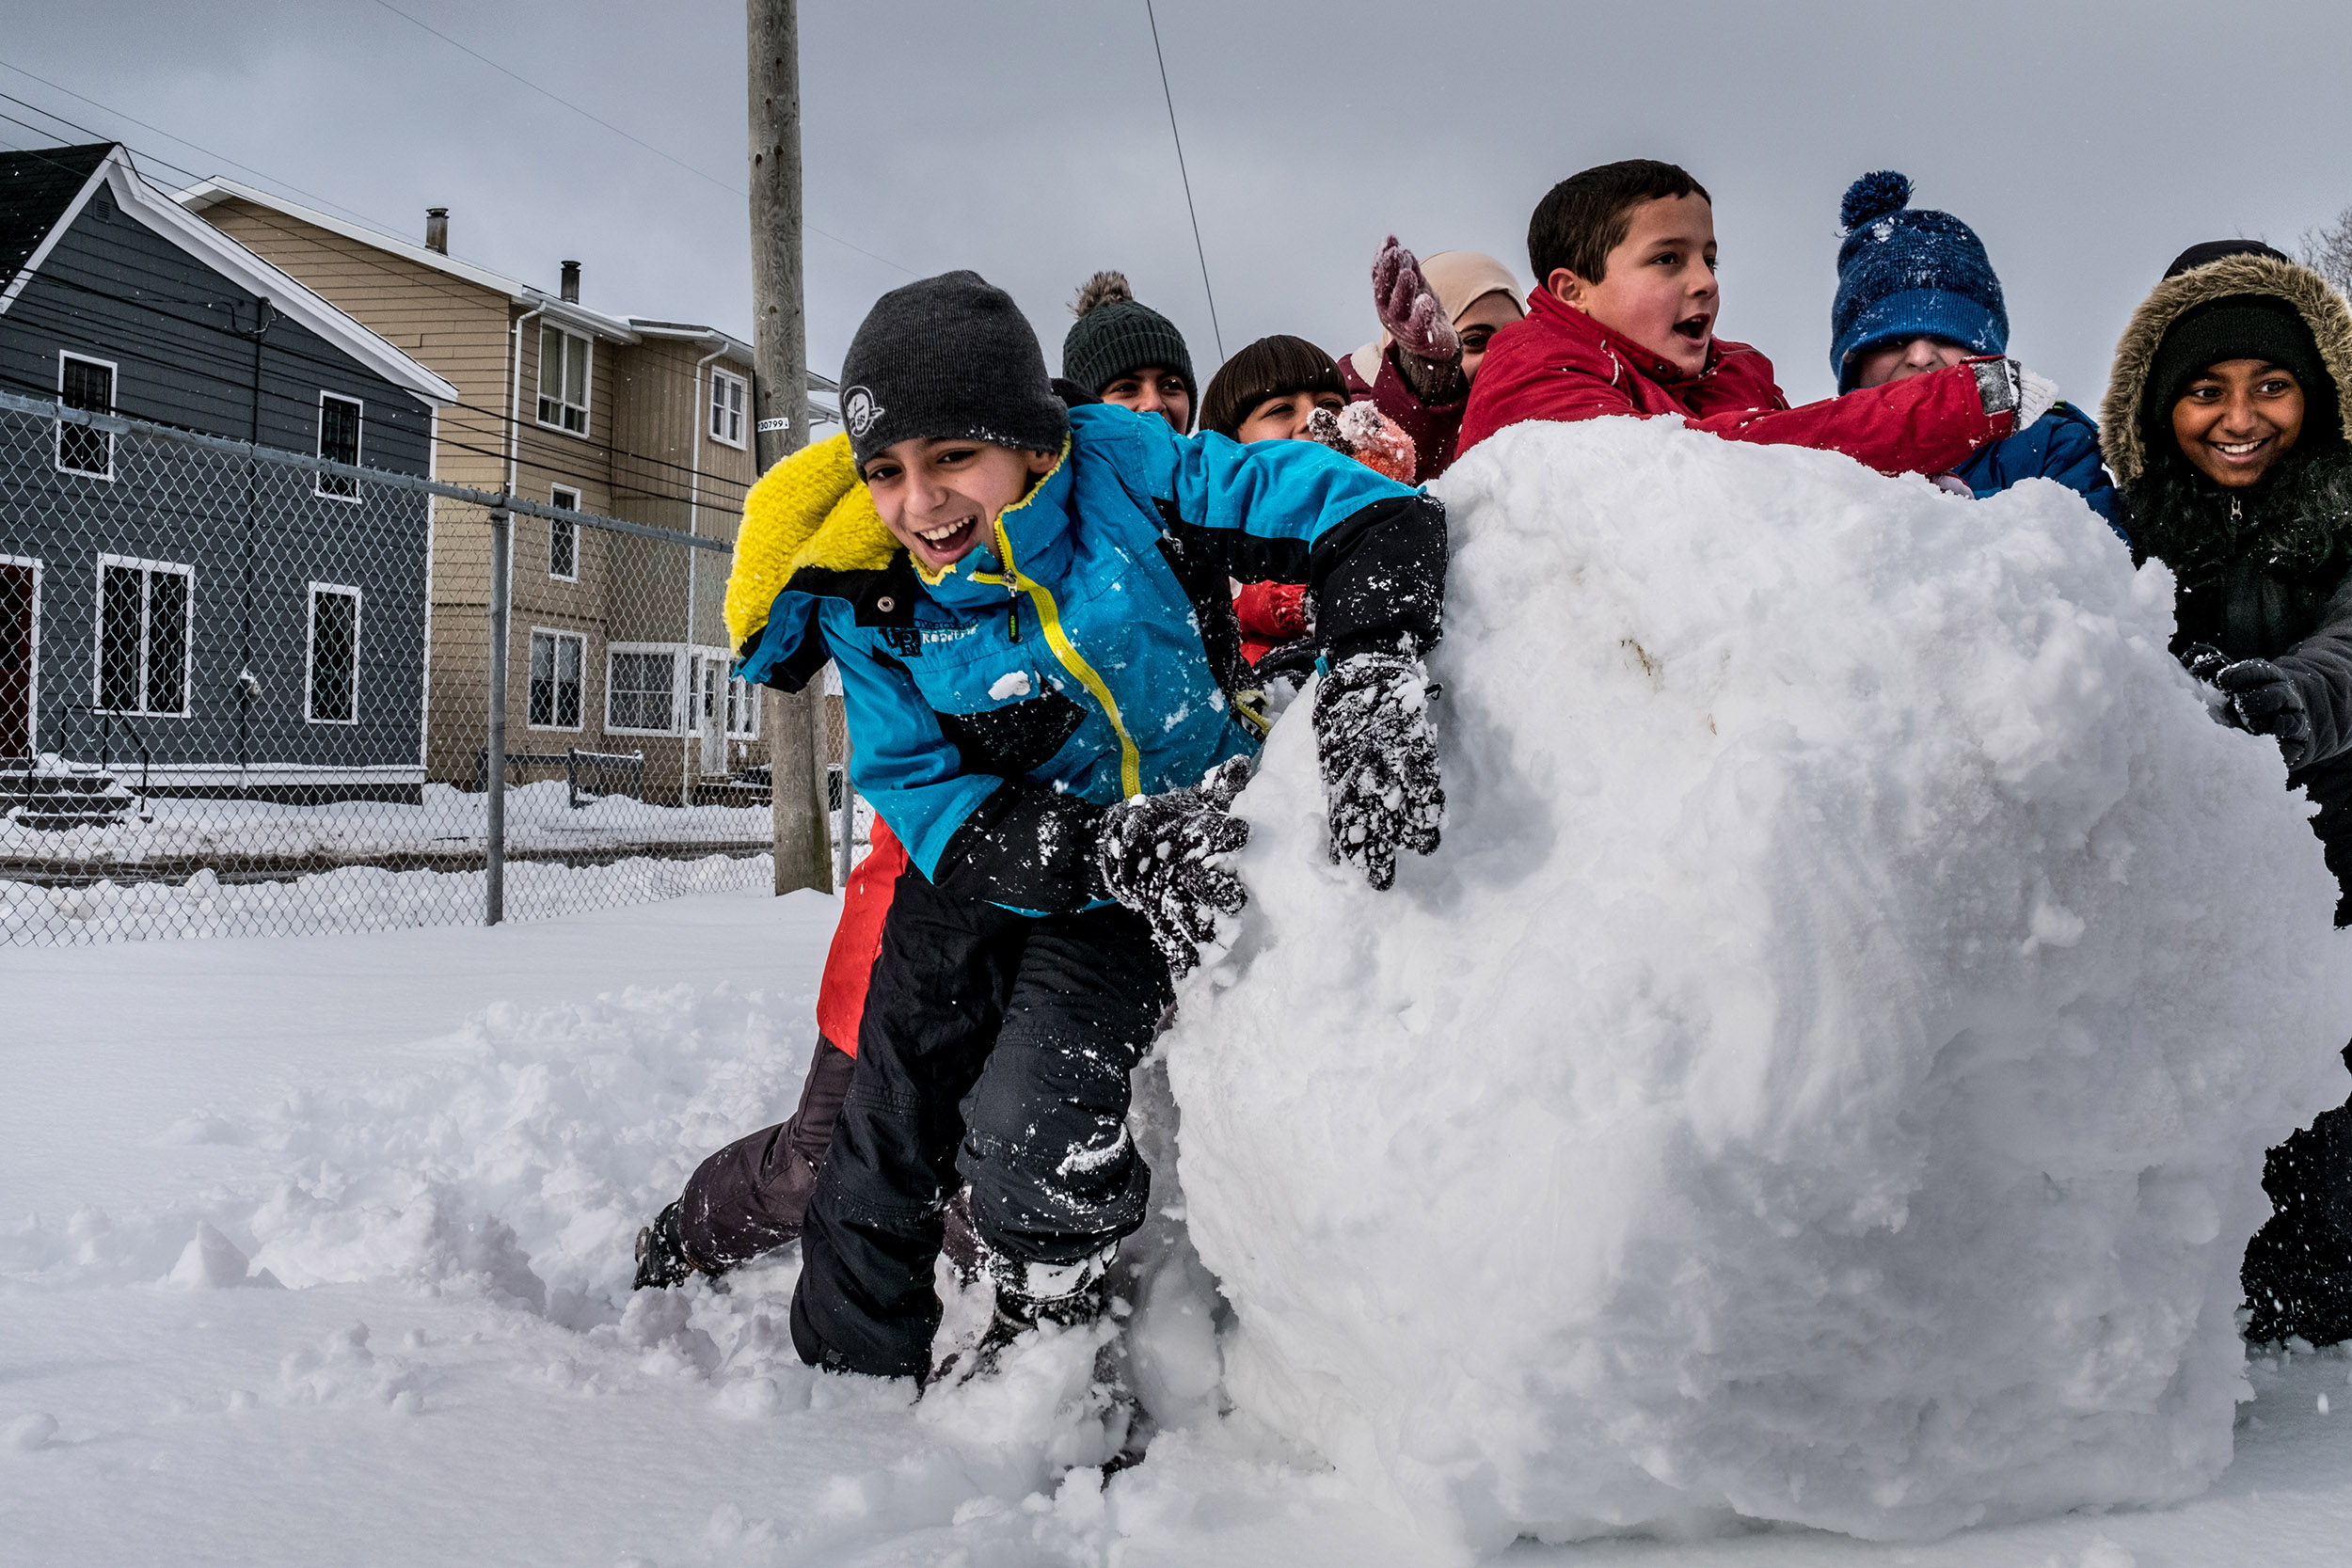 PHOTO: Basel Alrashdan, 11, plays with other sixth graders in the snow at St. Jean Elementary School in Charlottetown on Prince Edward Island, Canada, on Dec. 13, 2016.